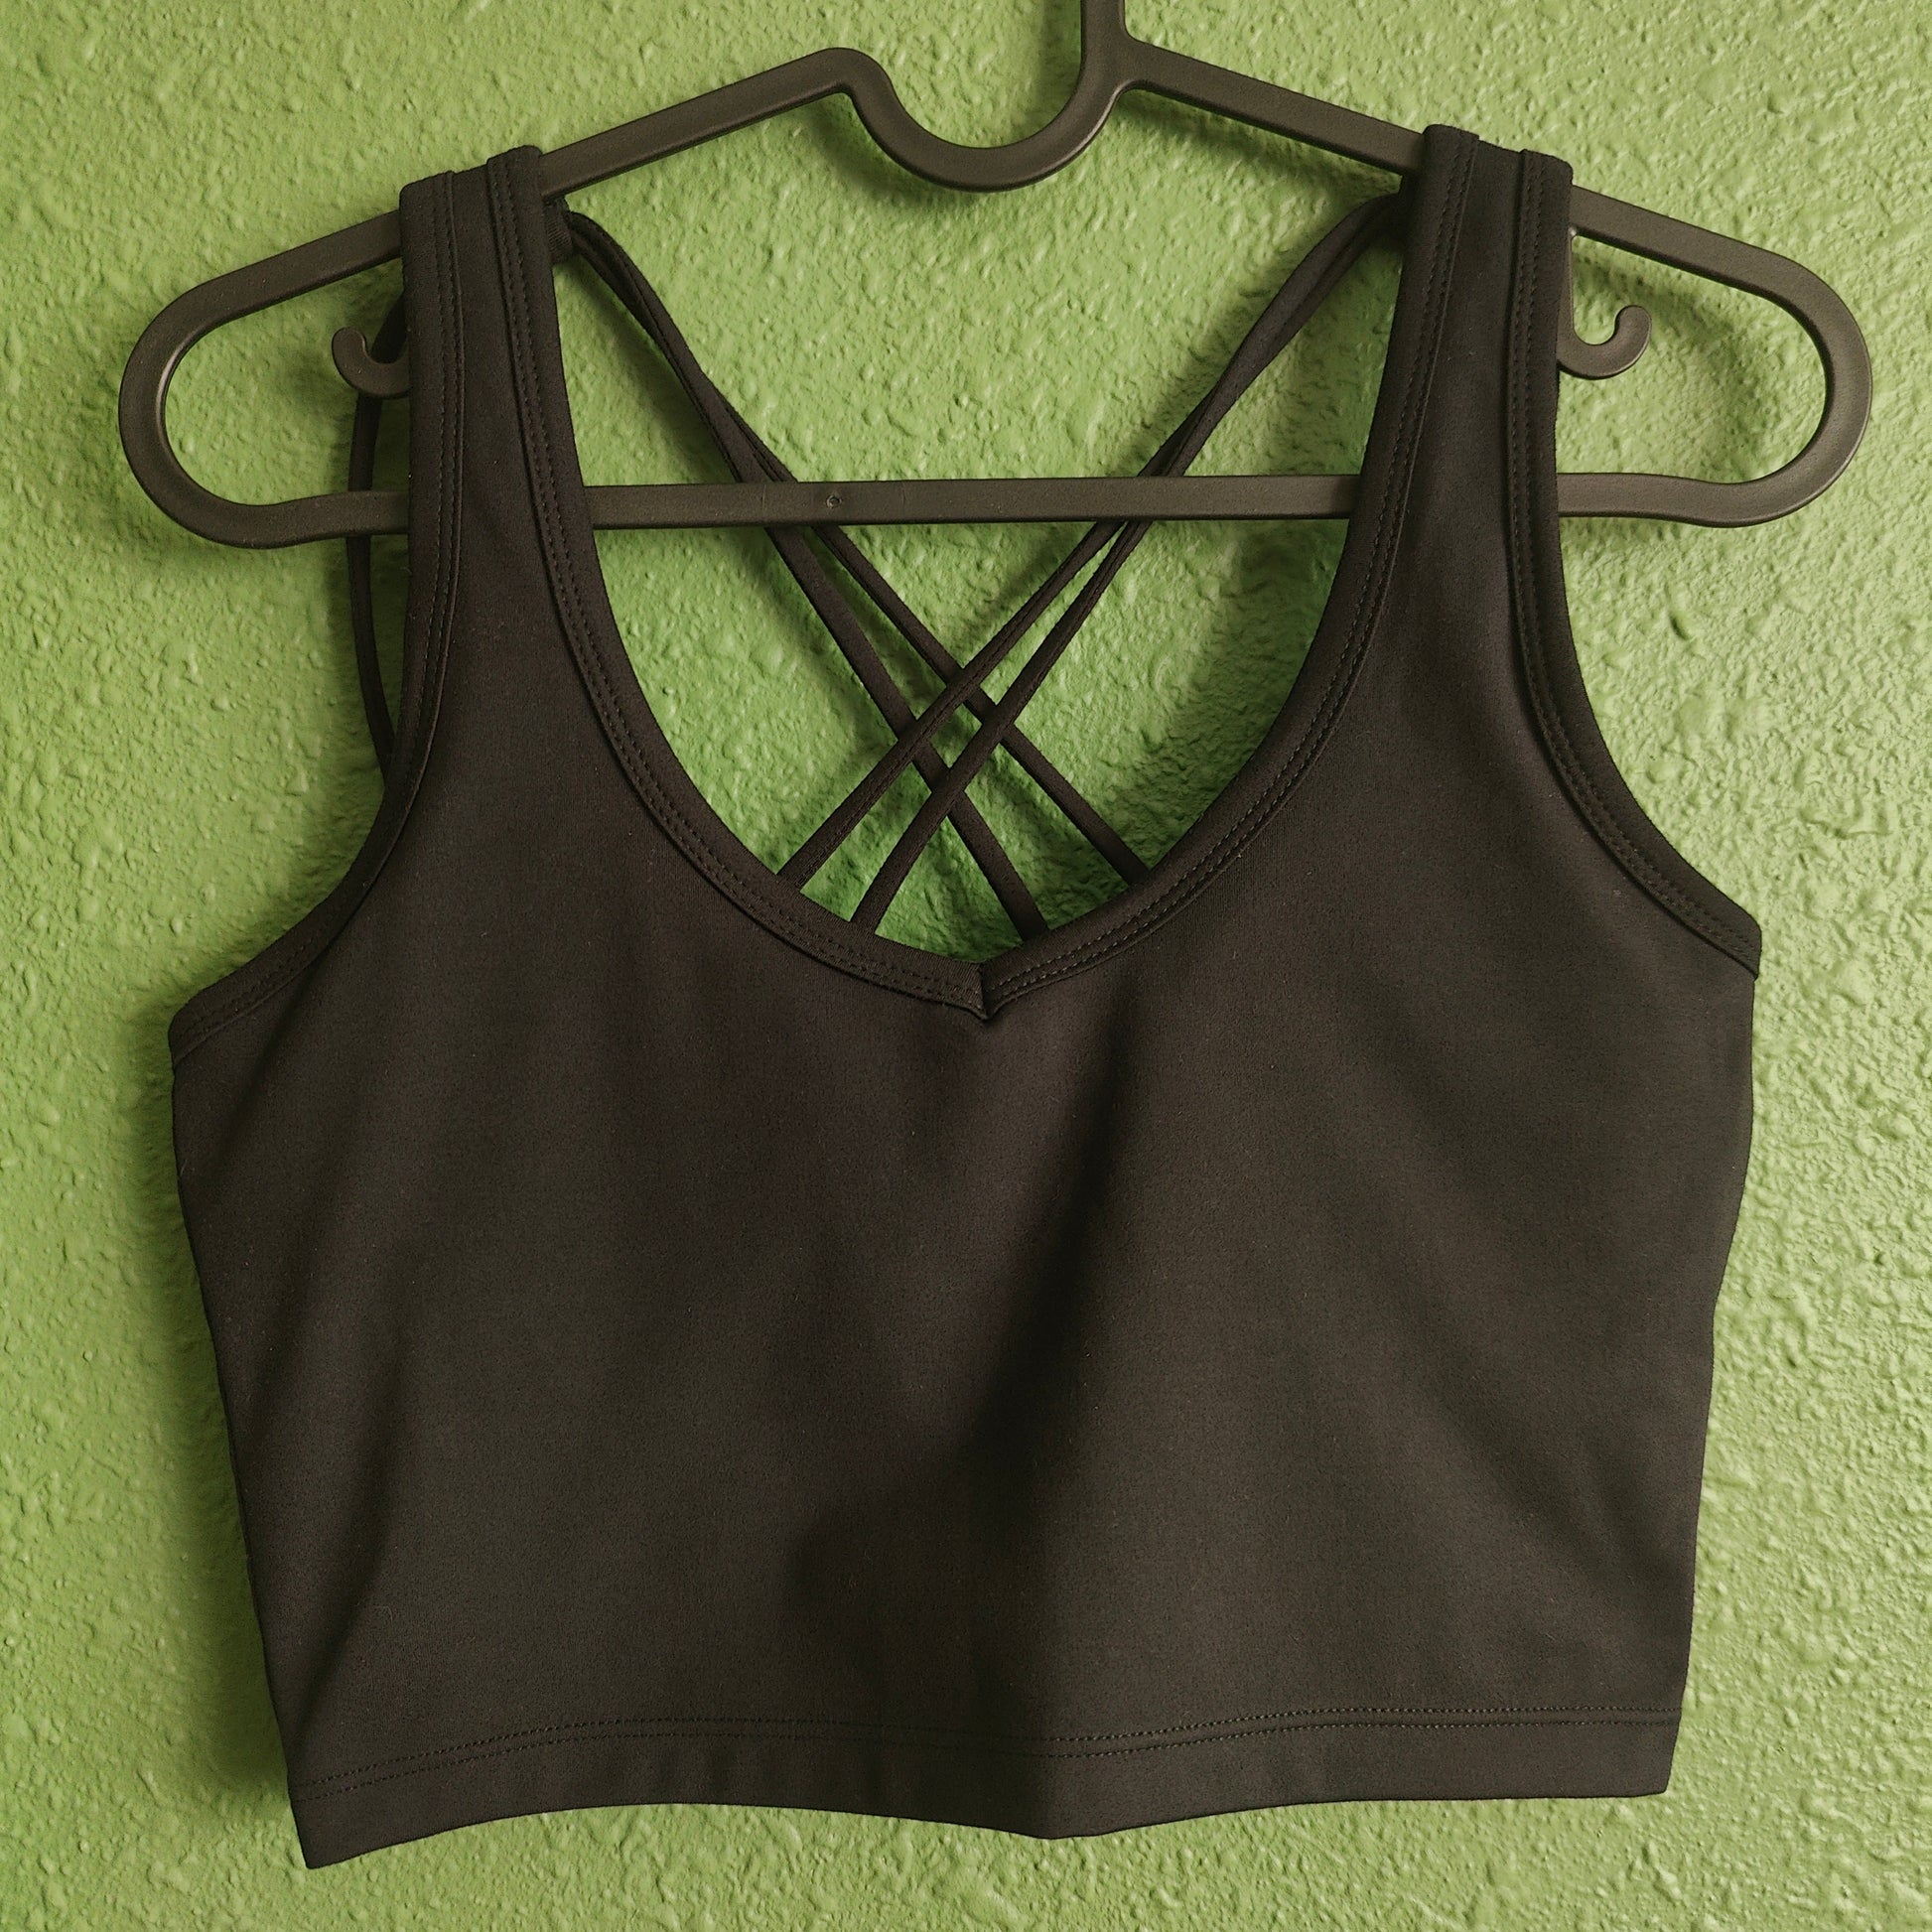 Buy Victoria's Secret Low Impact Strappy Back Yoga Sports Bra from